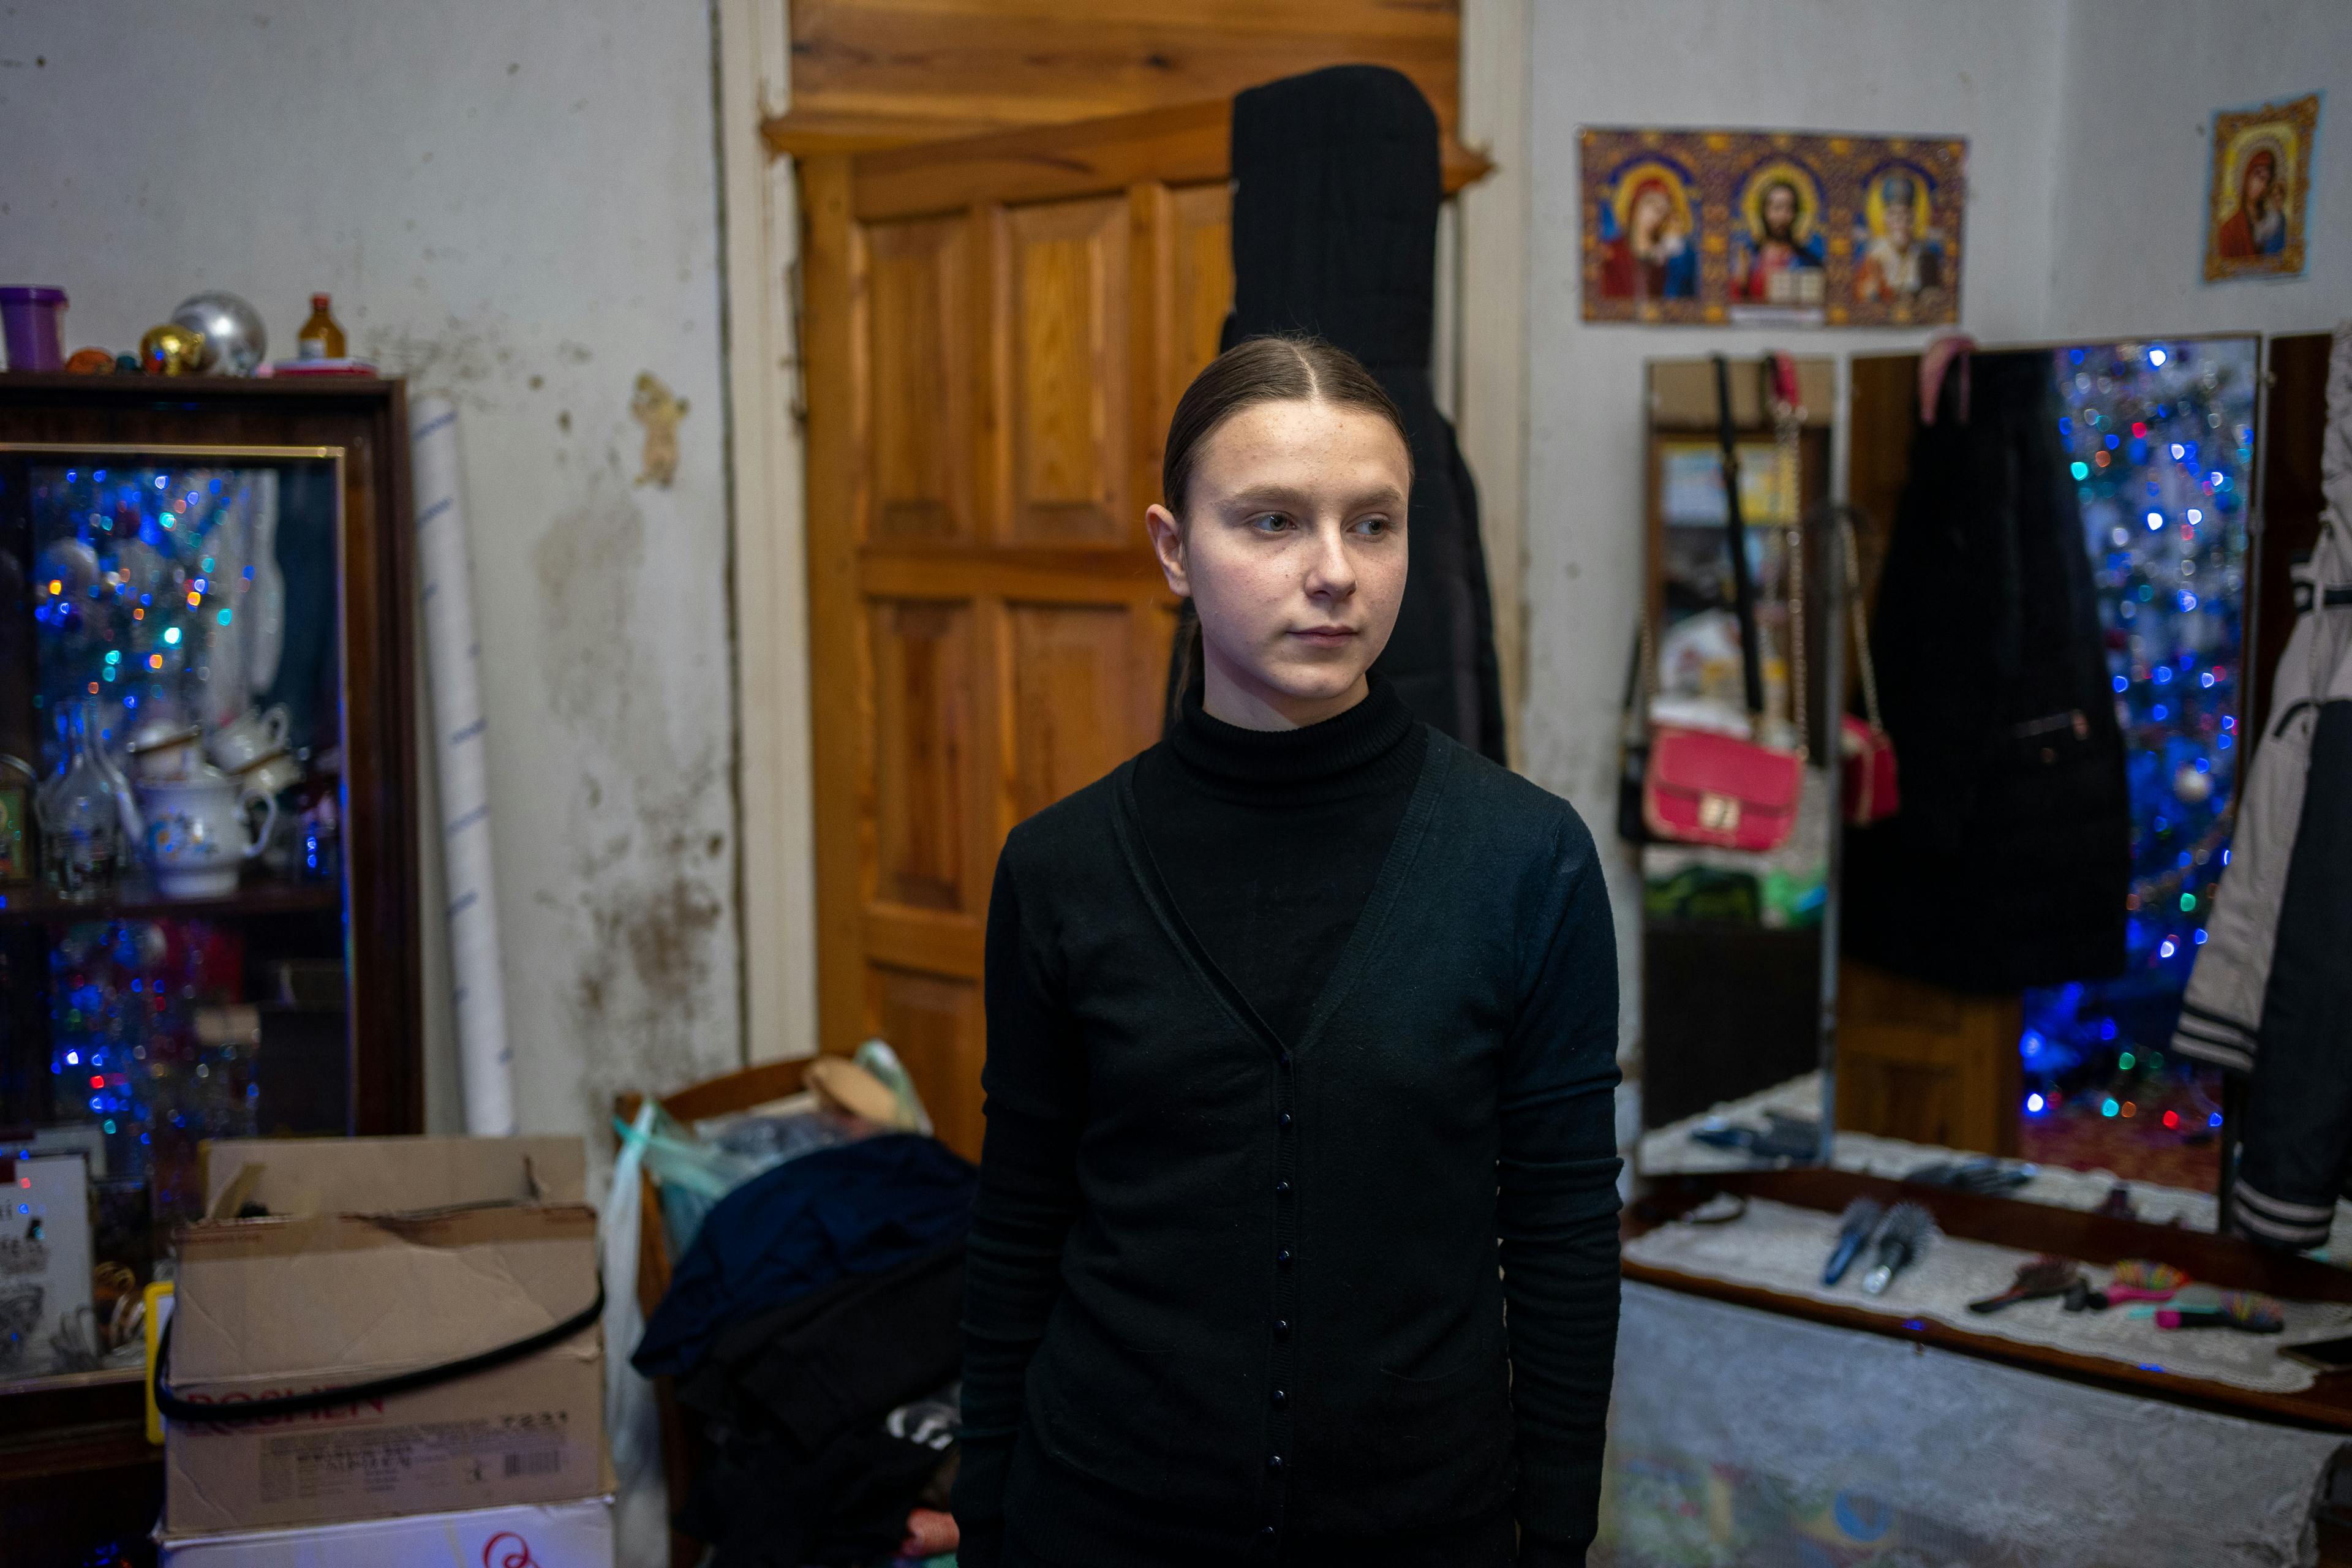 15-year-old Dasha is living in Izyum, Ukraine. For six months, she and her family endured isolation, starvation and fear.